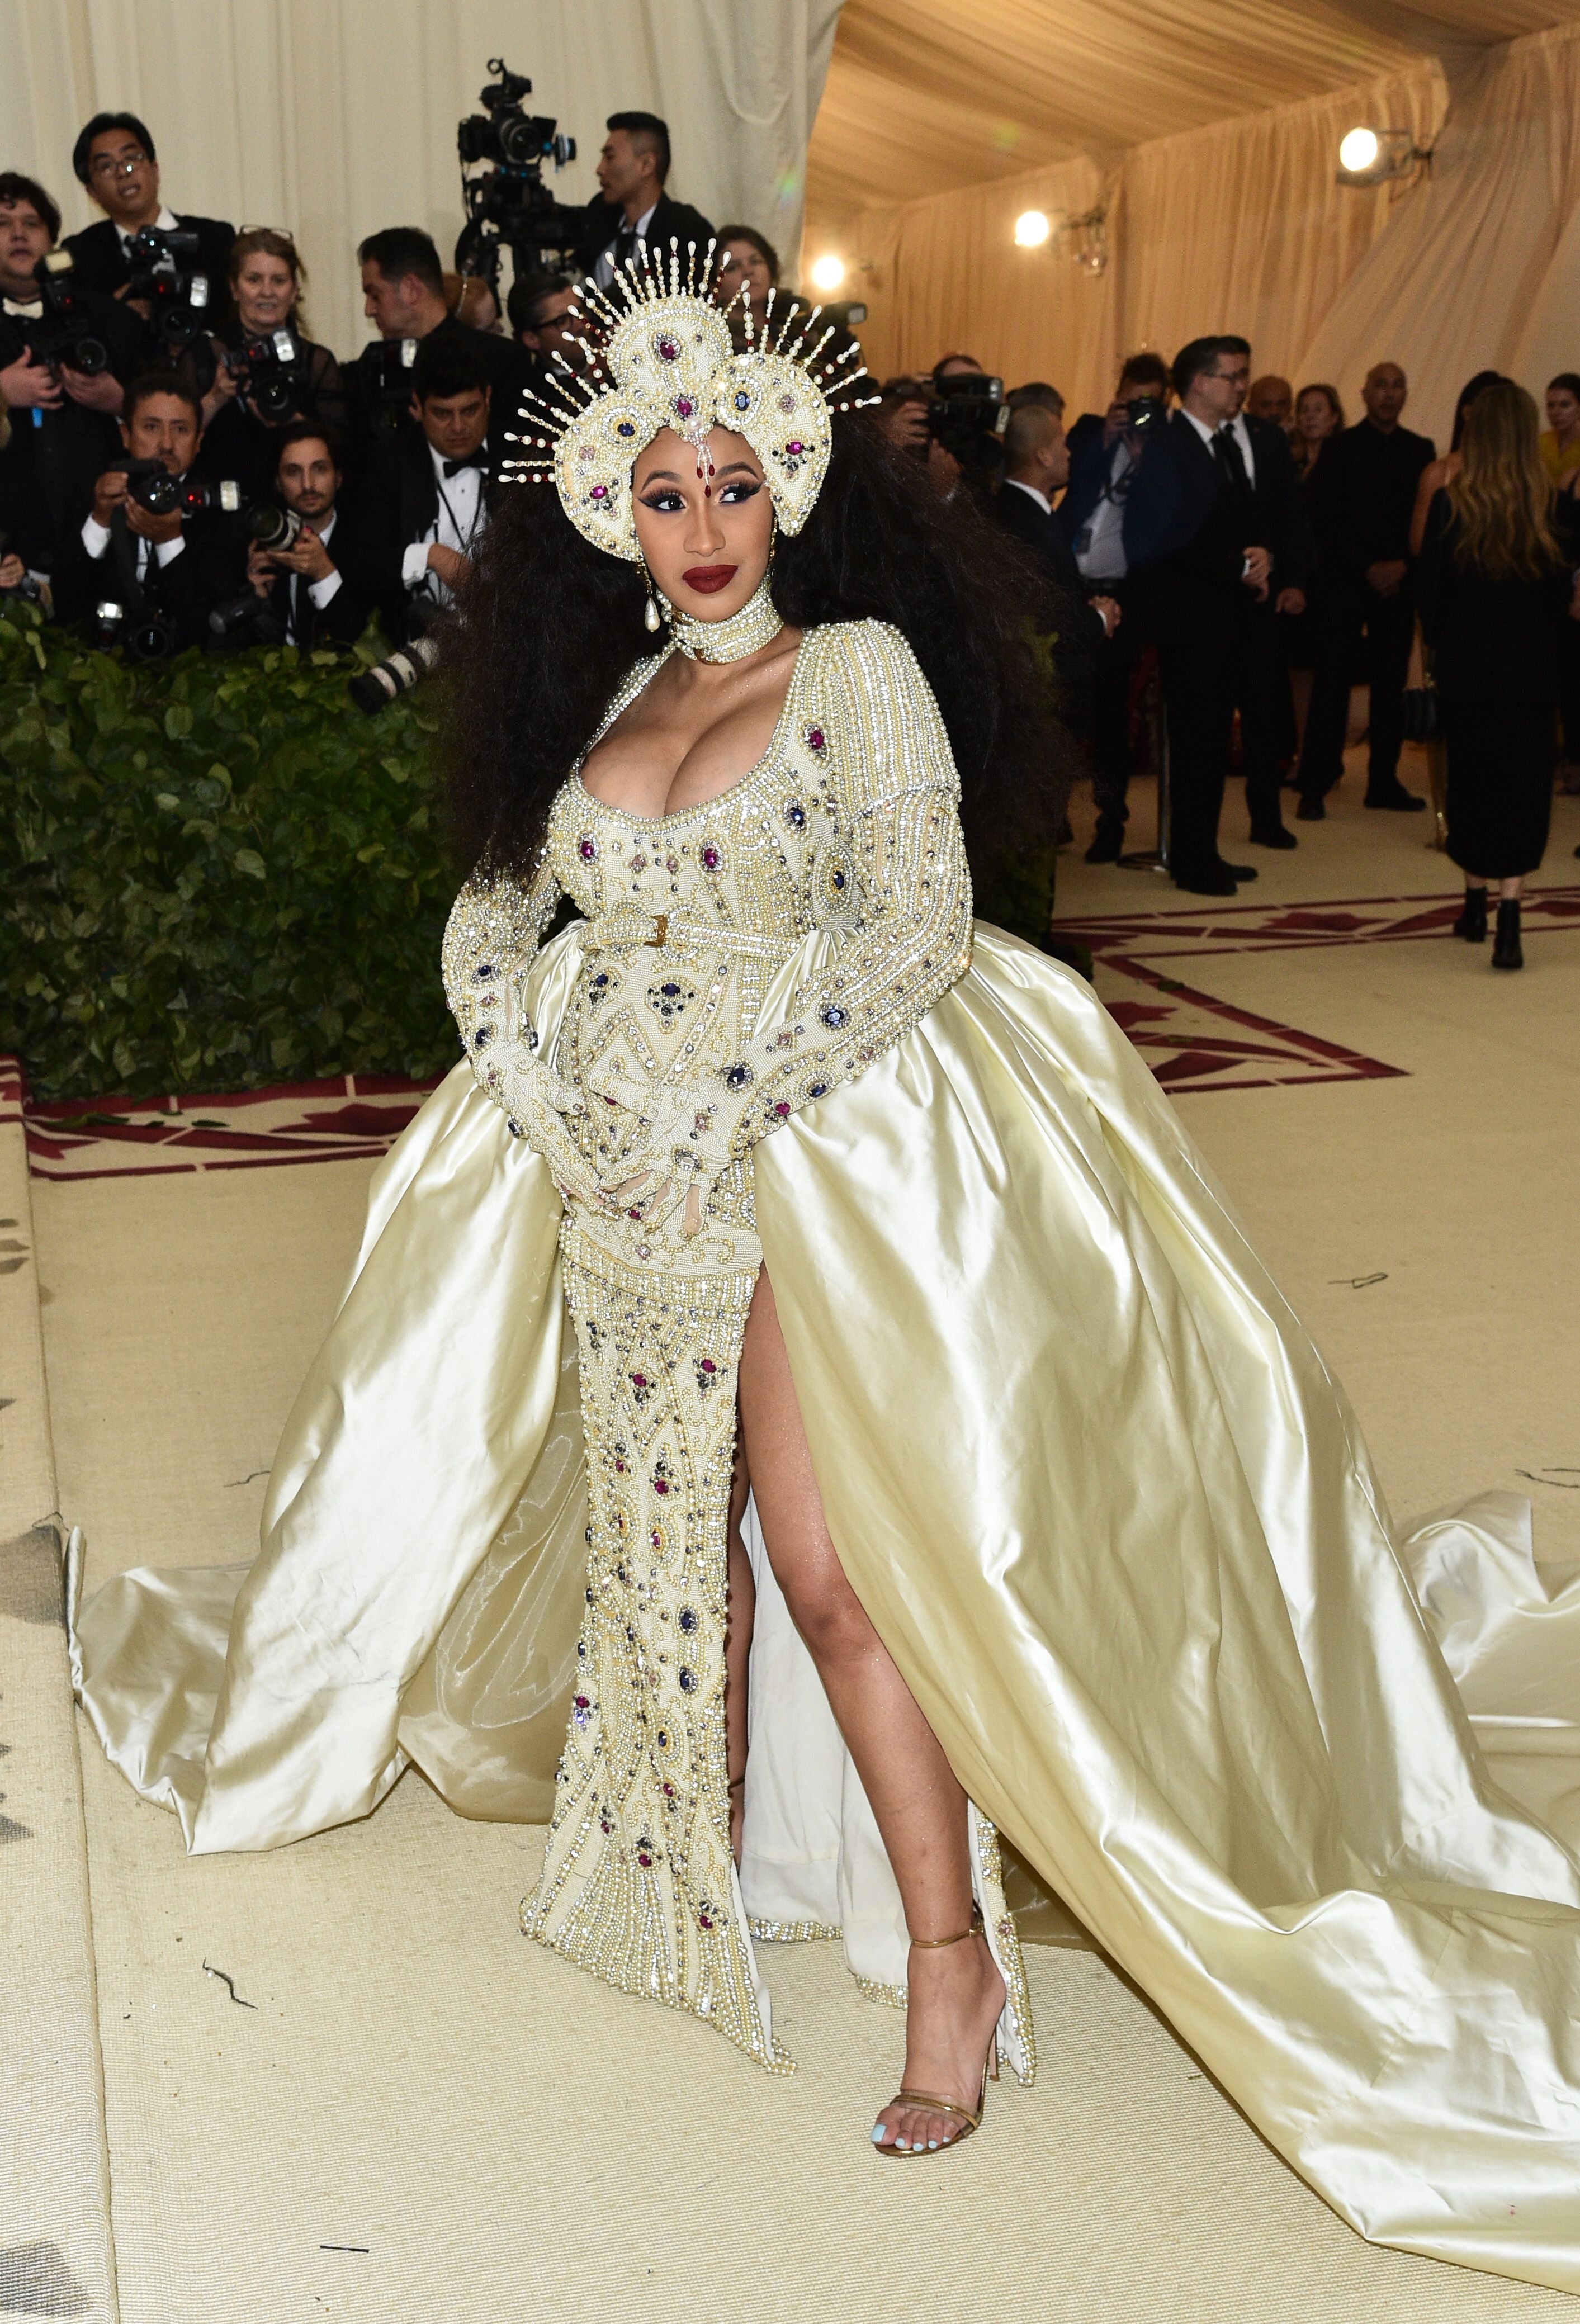 Cardi B’s First Met Gala Appearance Was An Angelic Showstopper
